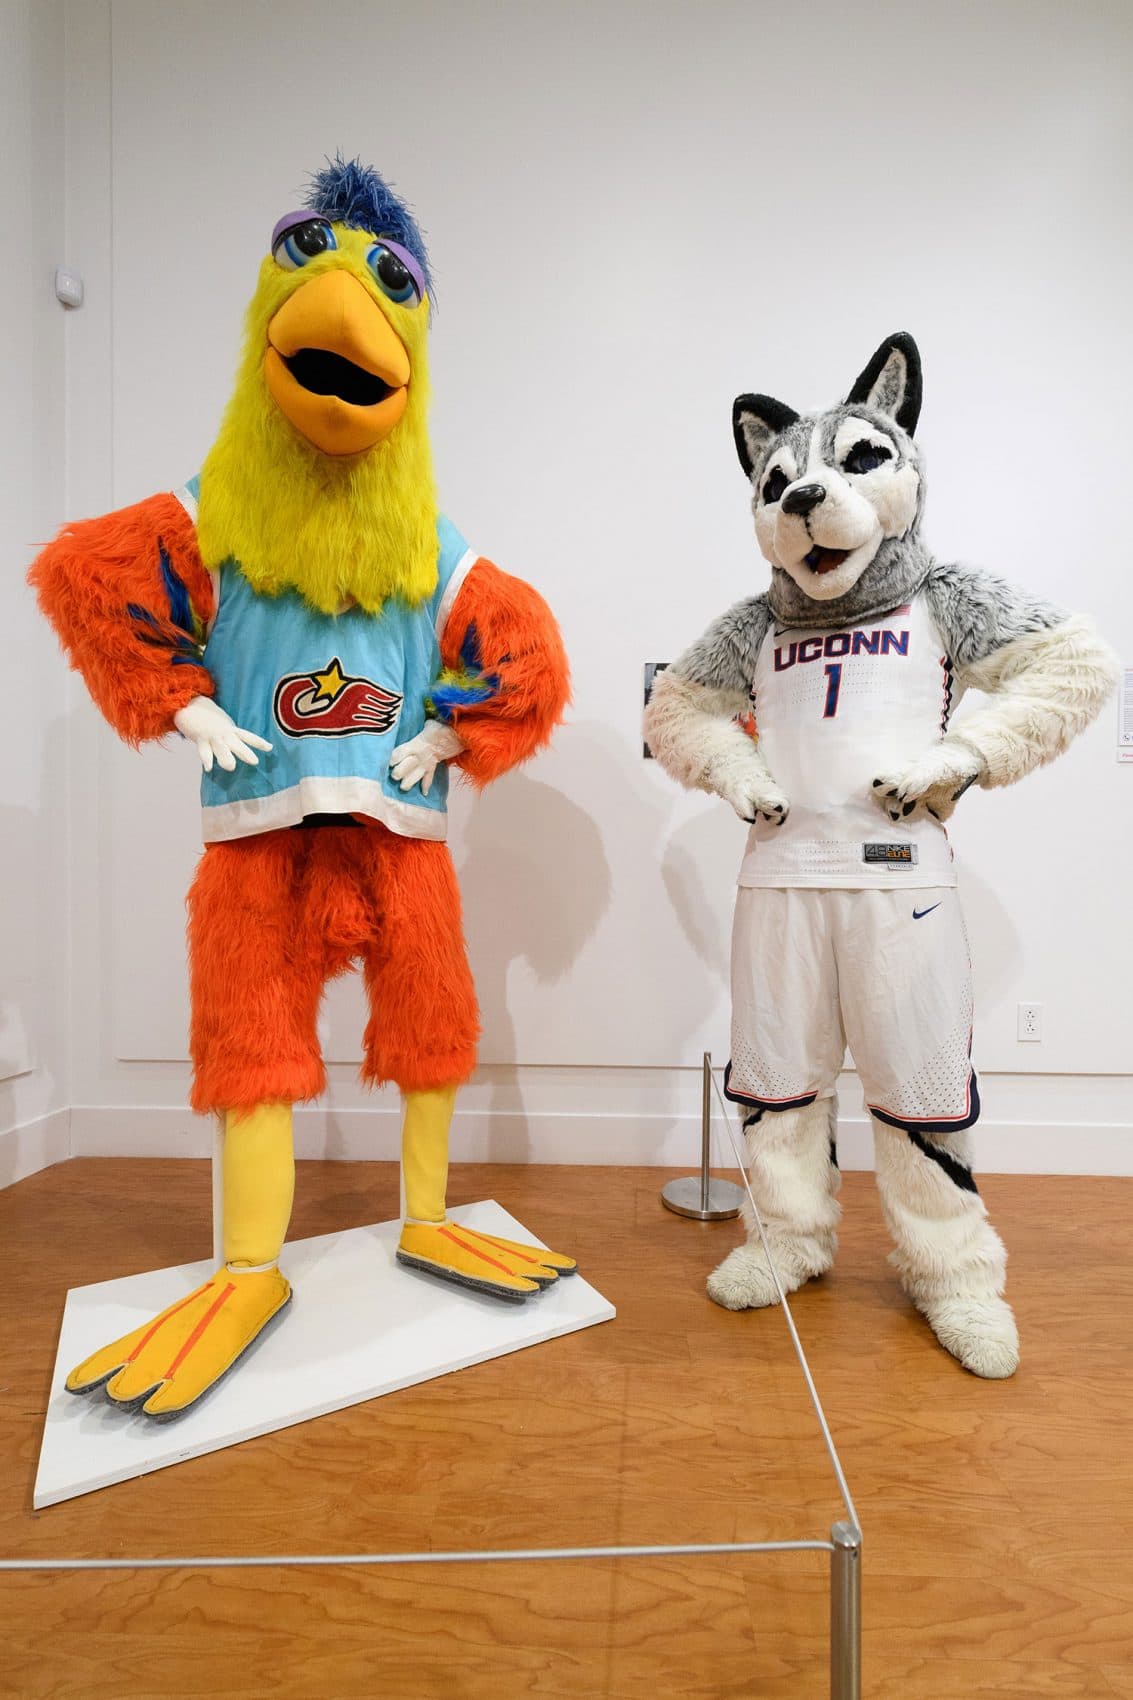 Mascots!' Exhibit Asks Why We Care So Much About These Fuzzy, Costumed  Sports Characters